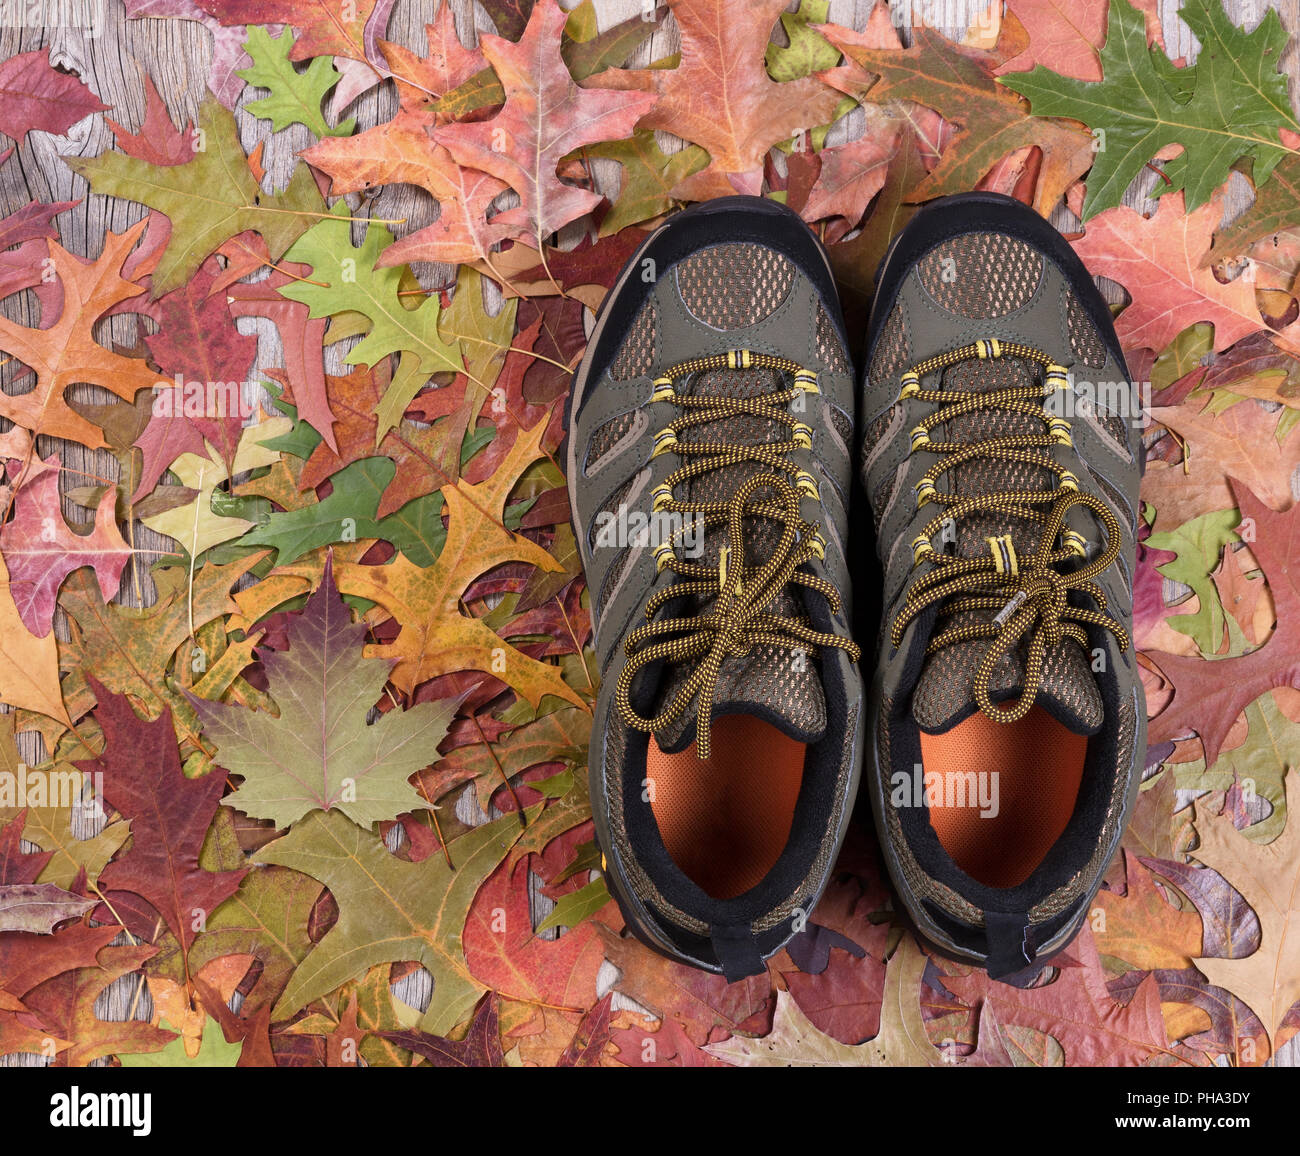 New hiking boots on autumn leaves and wood Stock Photo